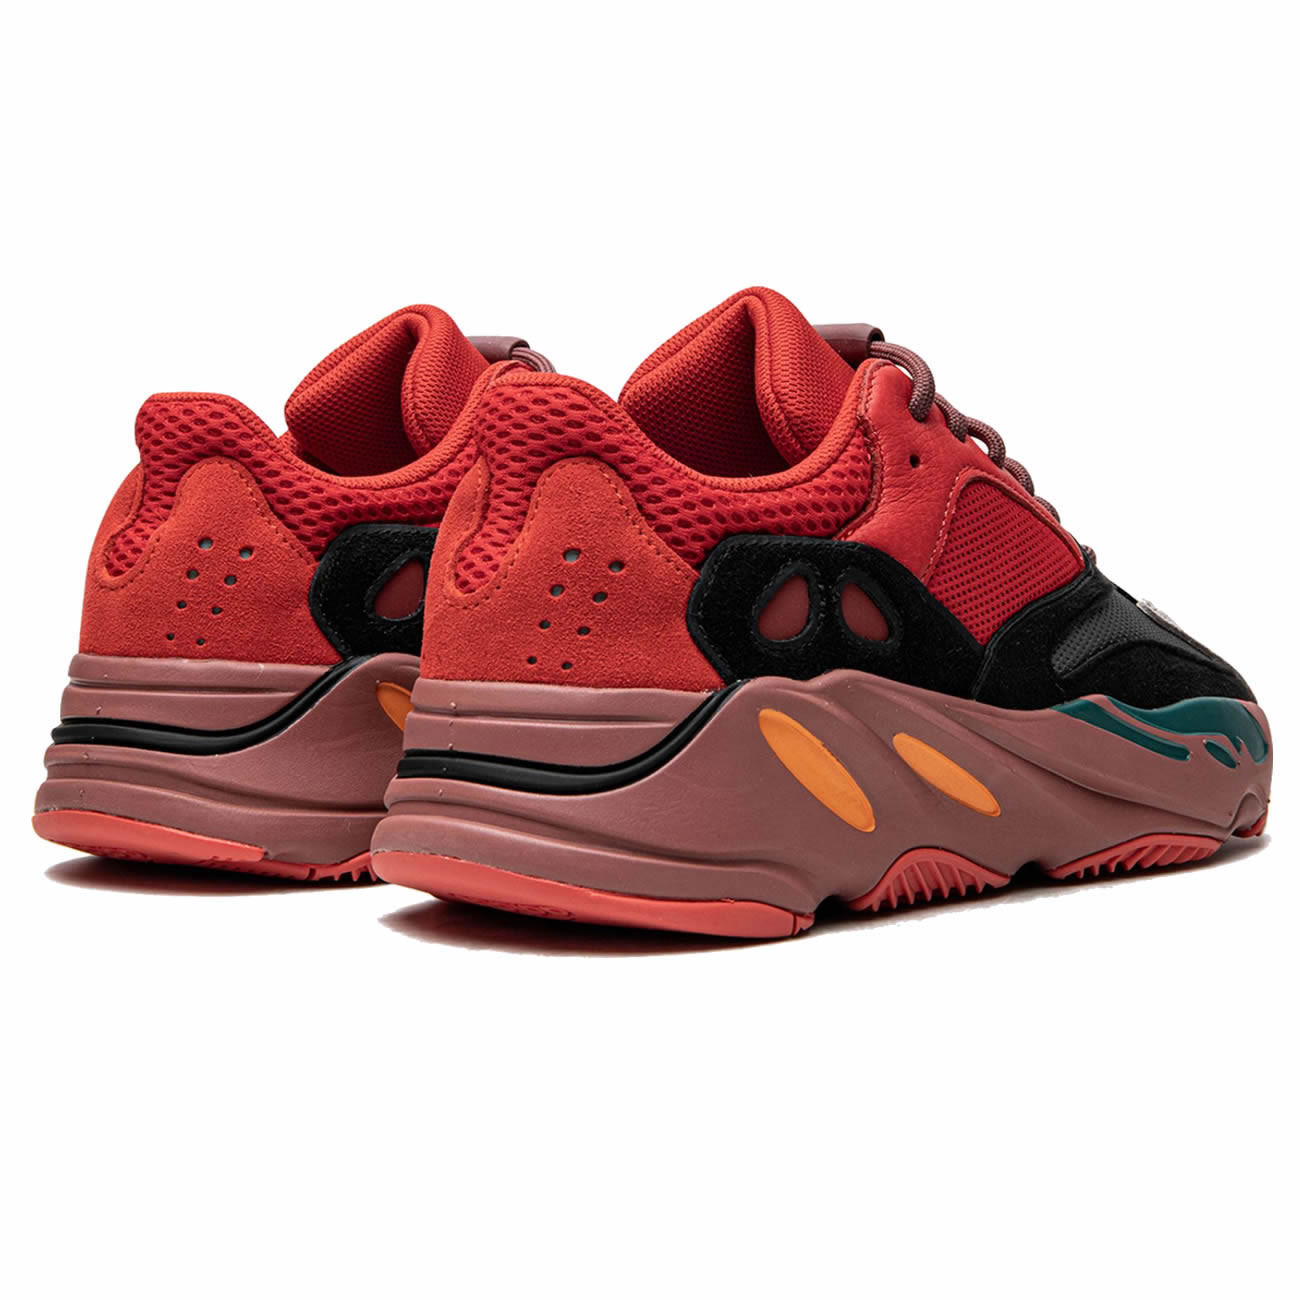 Adidas Yeezy Boost 700 Hi Res Red Hq6979 (3) - newkick.org